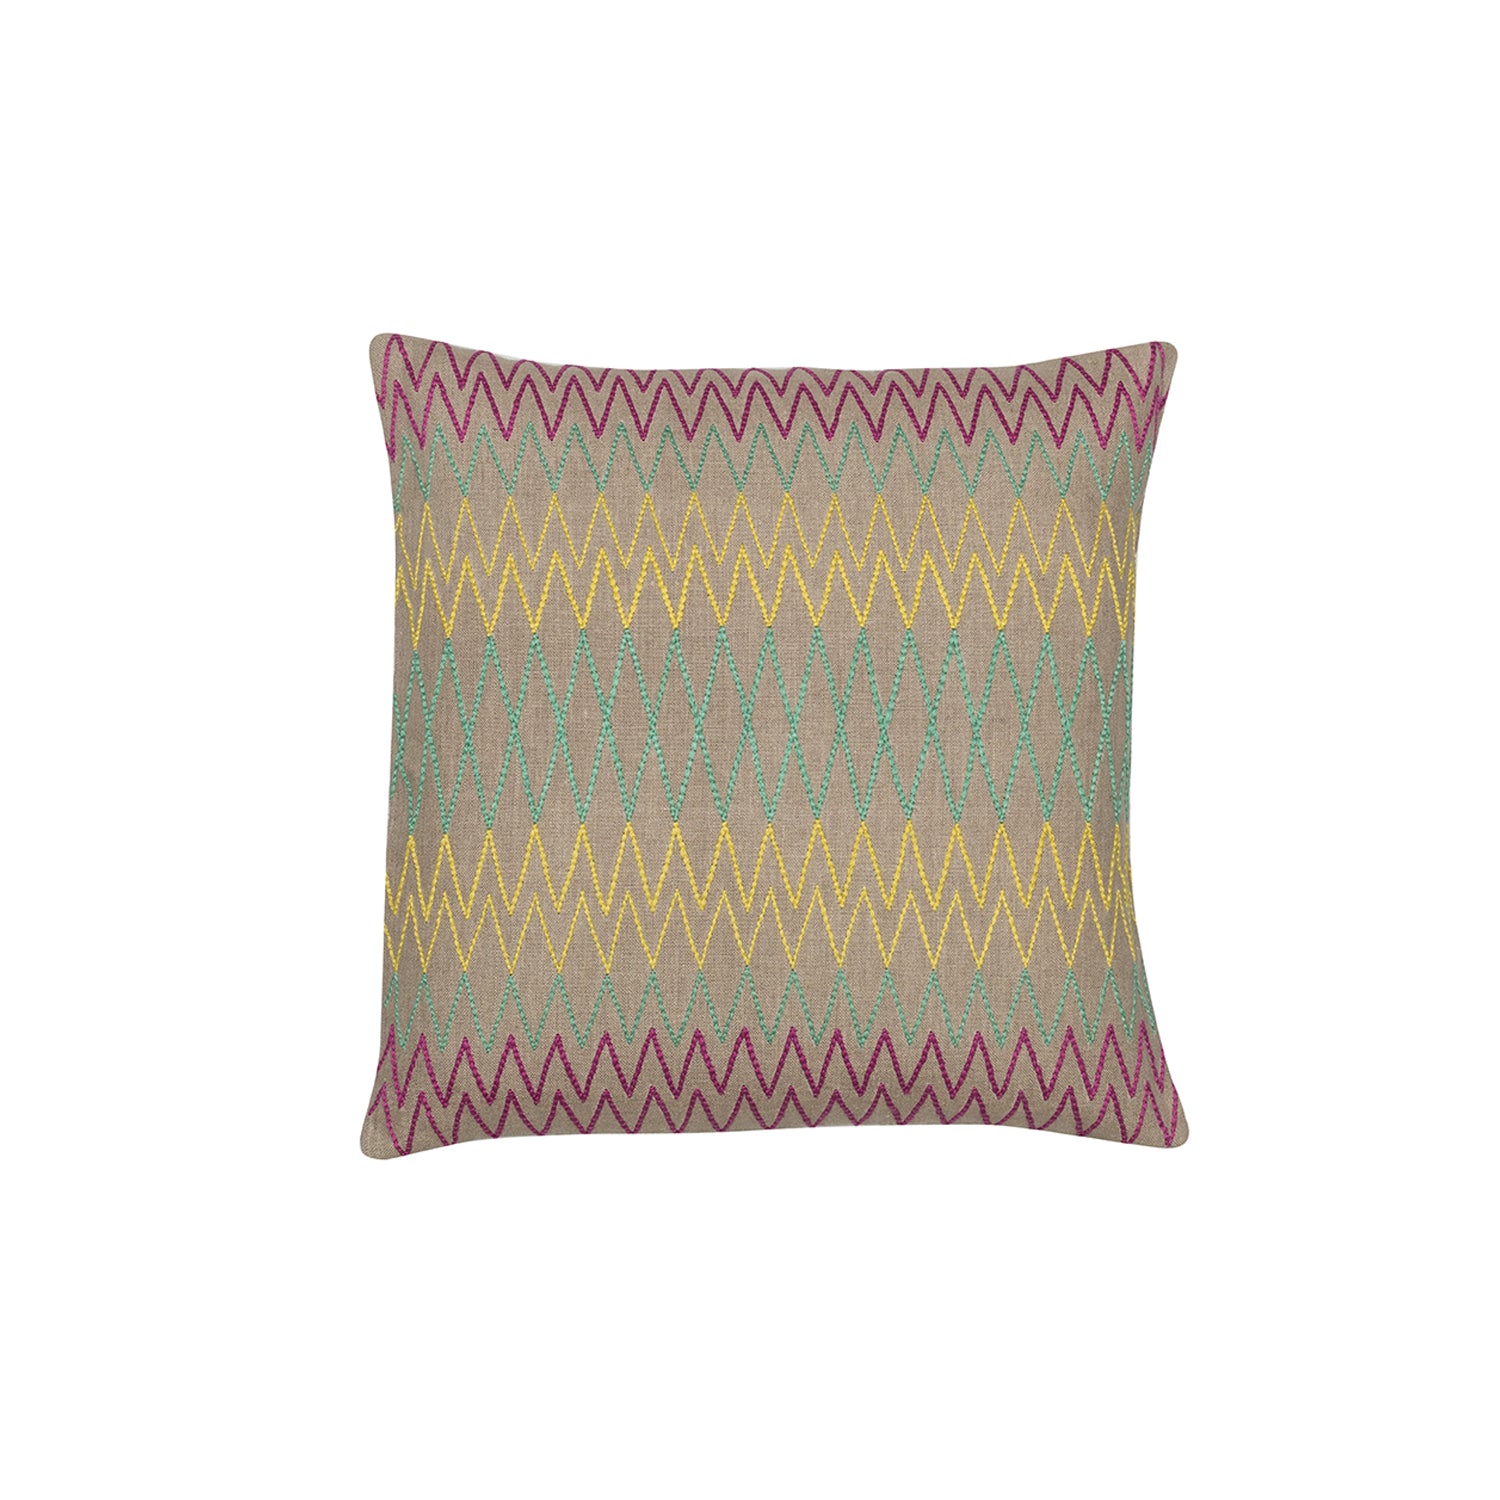 Square throw pillow with a repeating linear pattern of zigzag embroidery in shades of pink, green and yellow on a tan field.